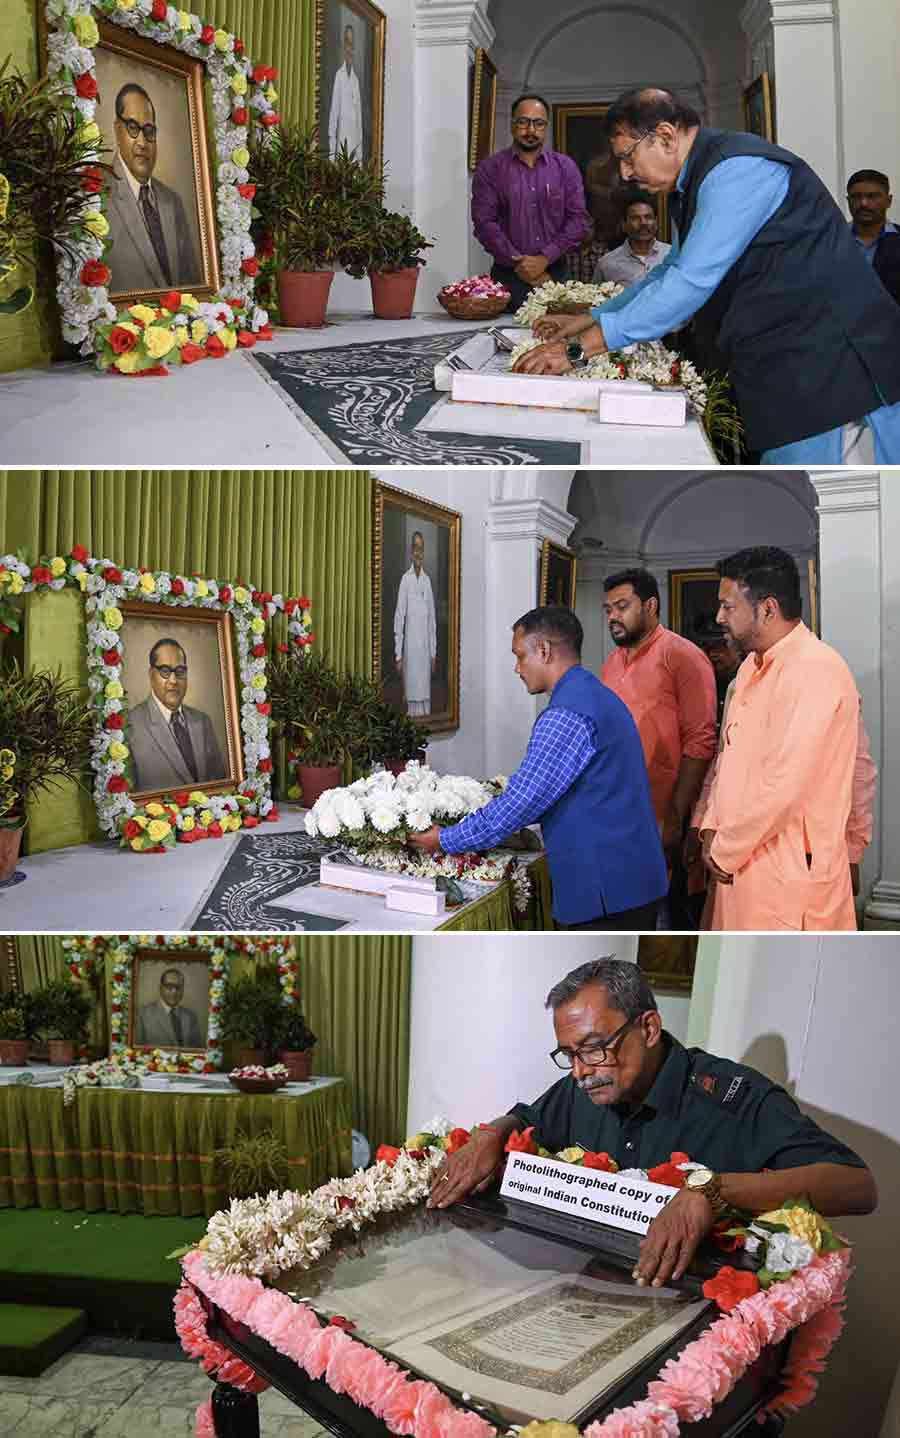 (FROM TOP) As part of the Constitution Day celebrations at the state legislative Assembly in Kolkata, West Bengal legislative Assembly speaker, Biman Banerjee, and BJP MLAs pay tribute to BR Ambedkar, chairperson of the drafting committee of the Constitution; deputy marshall, West Bengal legislative Assembly, Bholanath Mukherjee, takes a close look at a photolithographic copy of the original Constitution at the event. Constitution Day is celebrated on November 26 to mark the date of adoption of the Indian Constitution in 1949. It came into effect on January 26, 1950